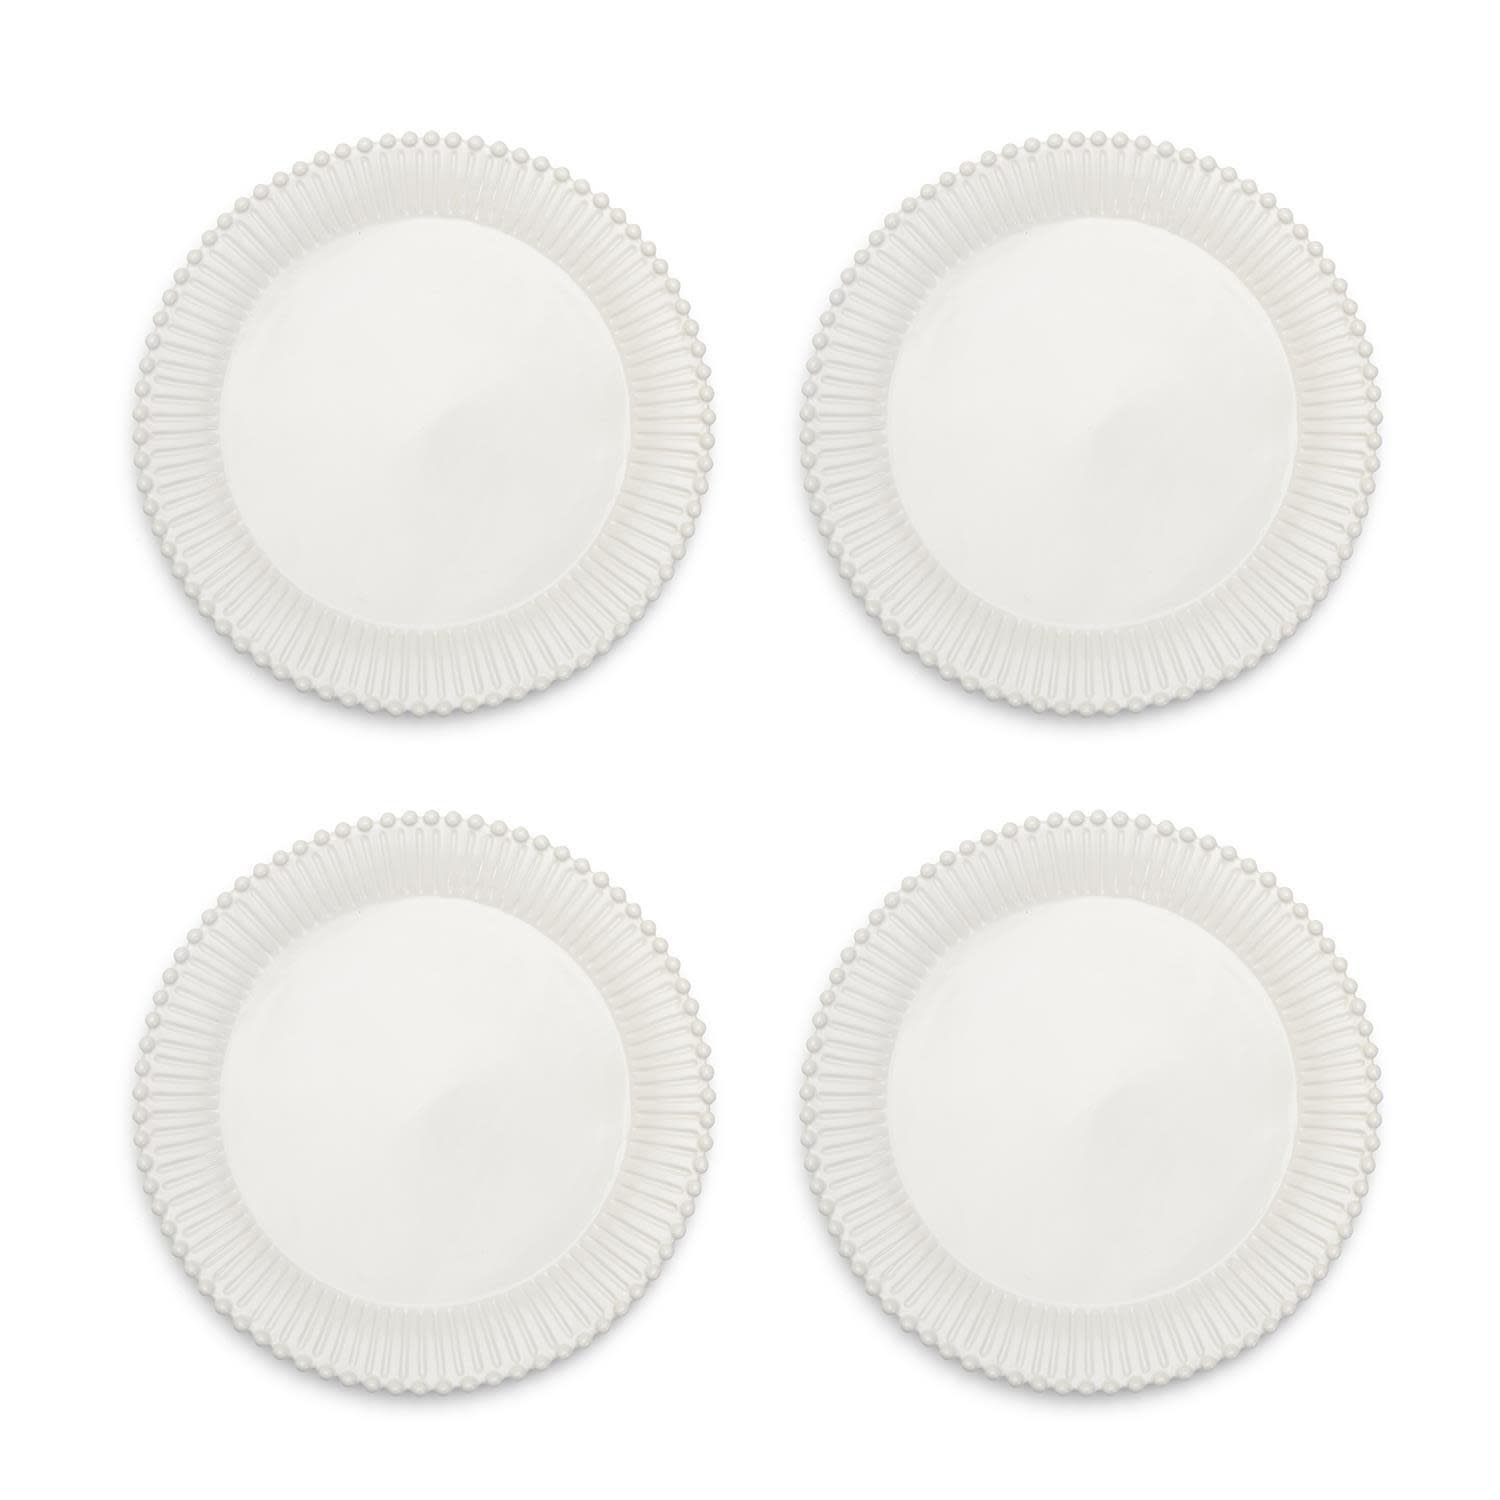 Heirloom Pearl Edge Dinner Plate, 11.5" Round, For local pick up only